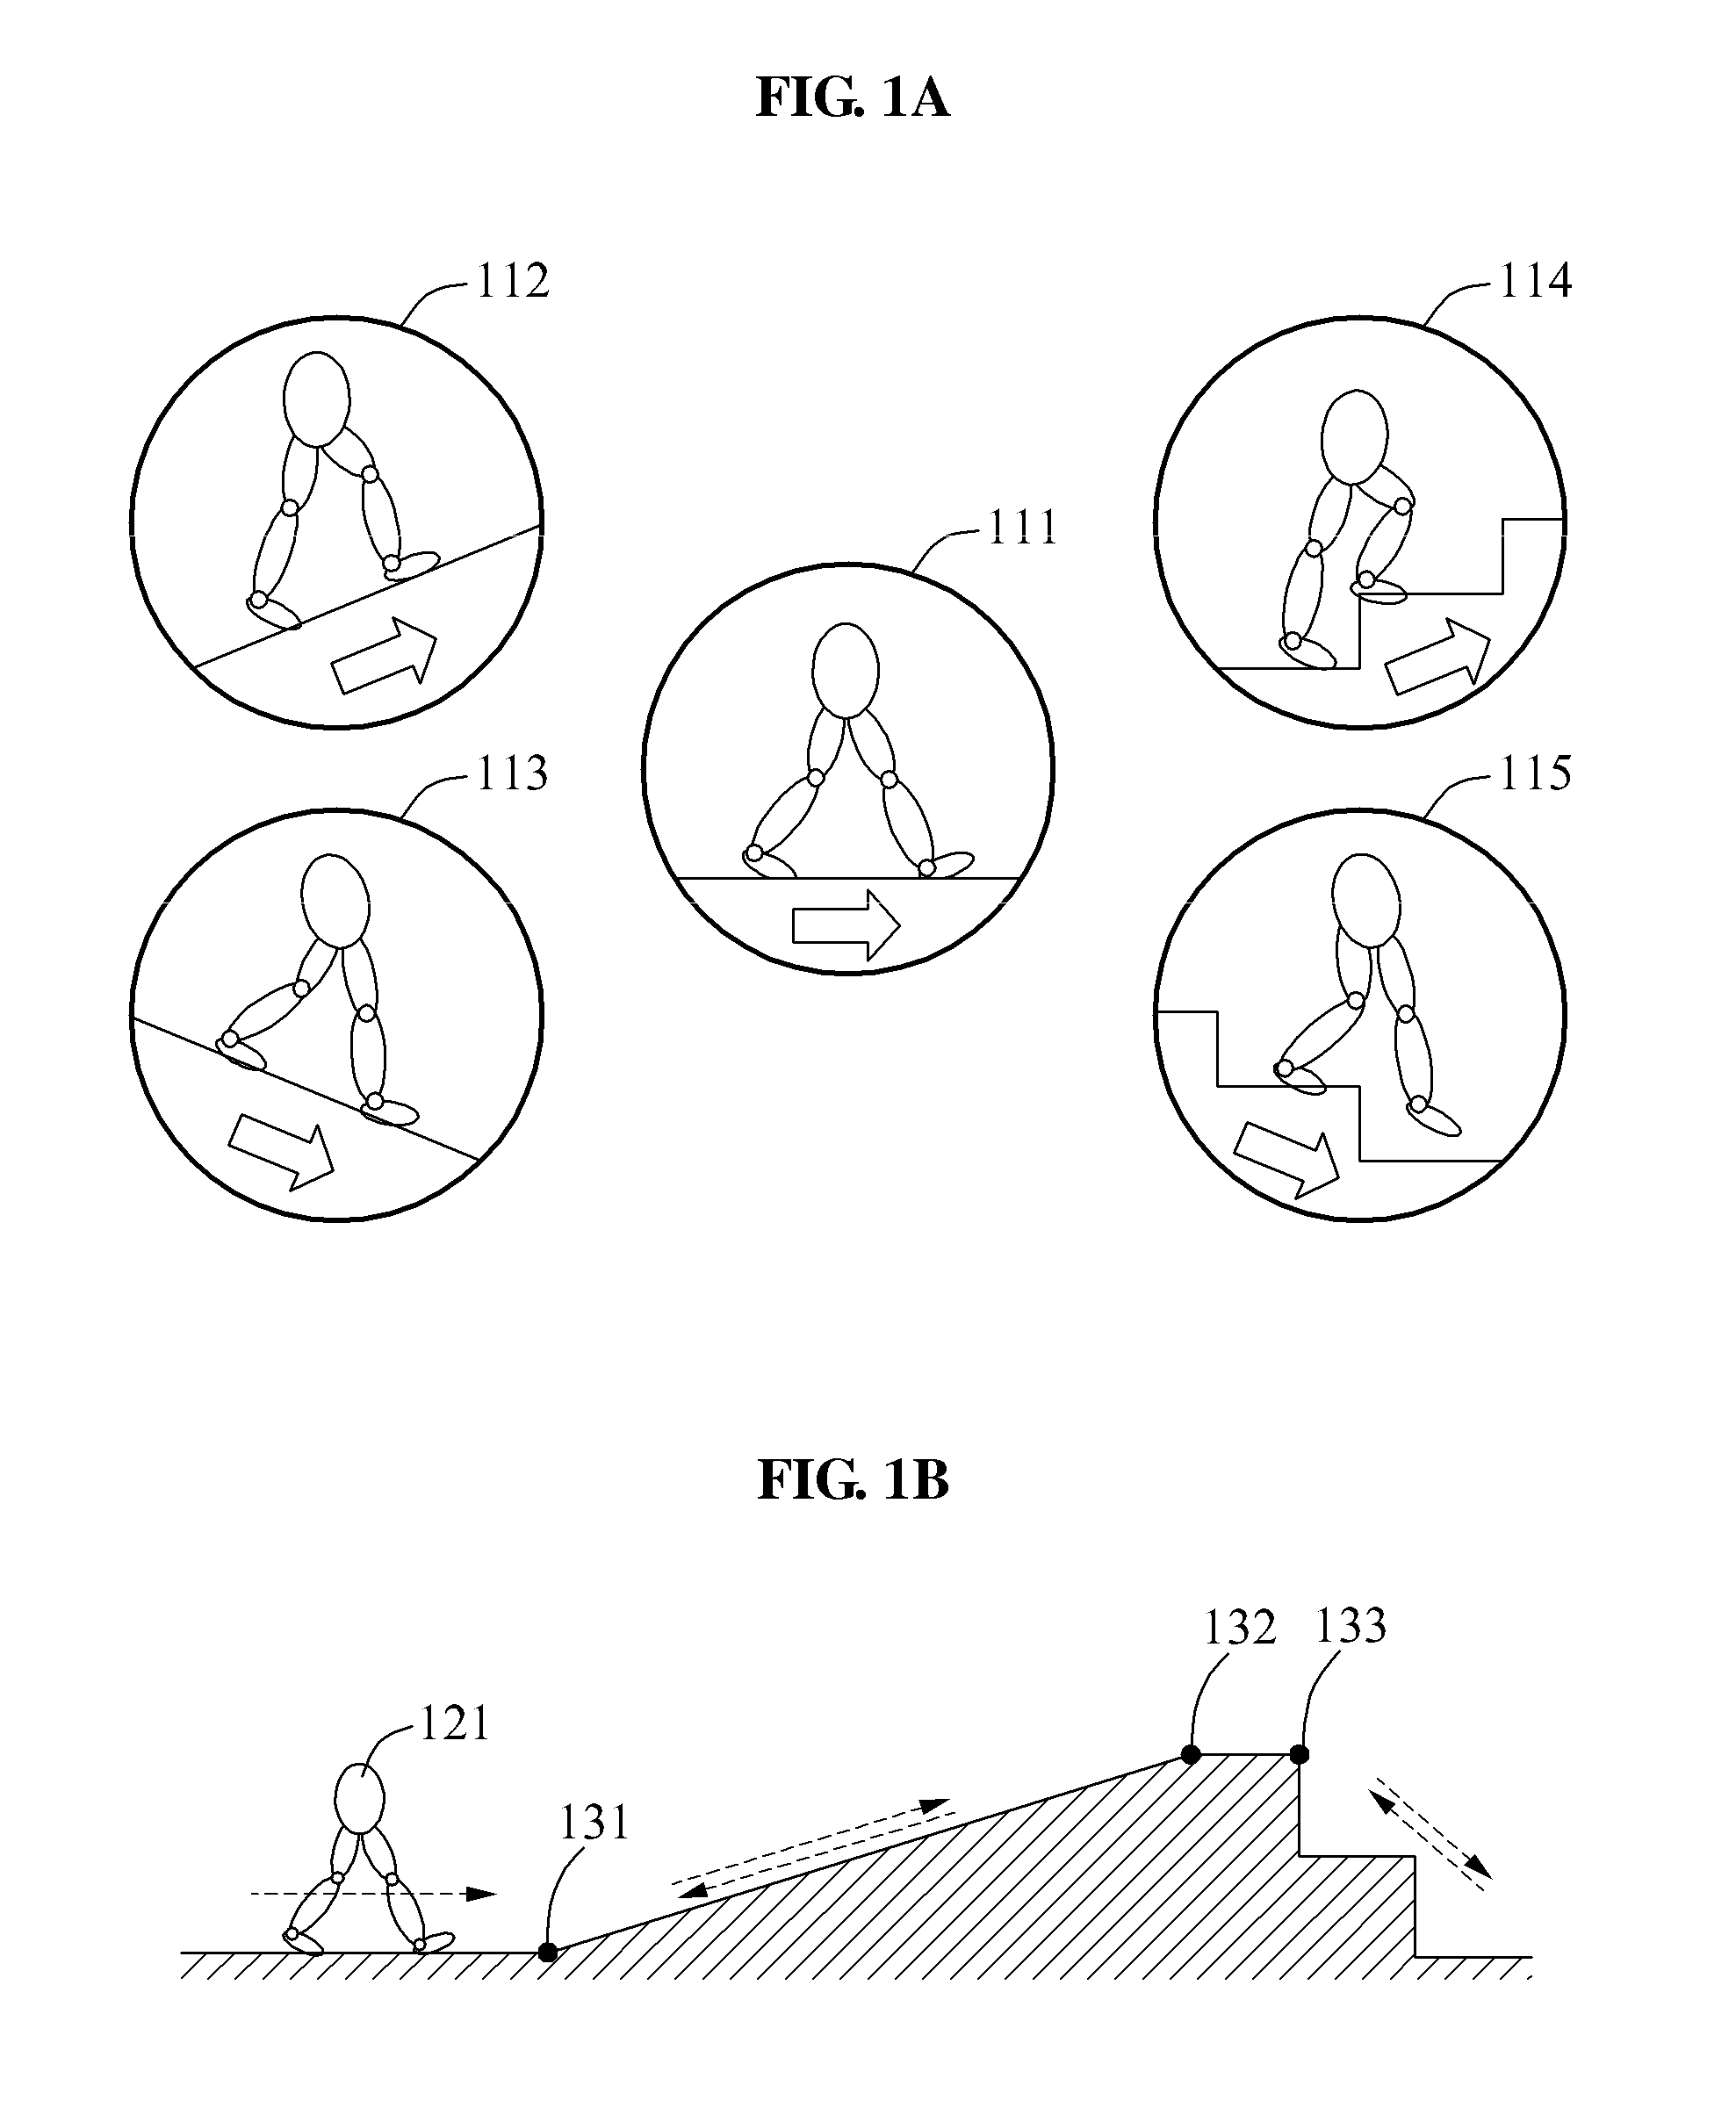 Method and apparatus for recognizing gait task